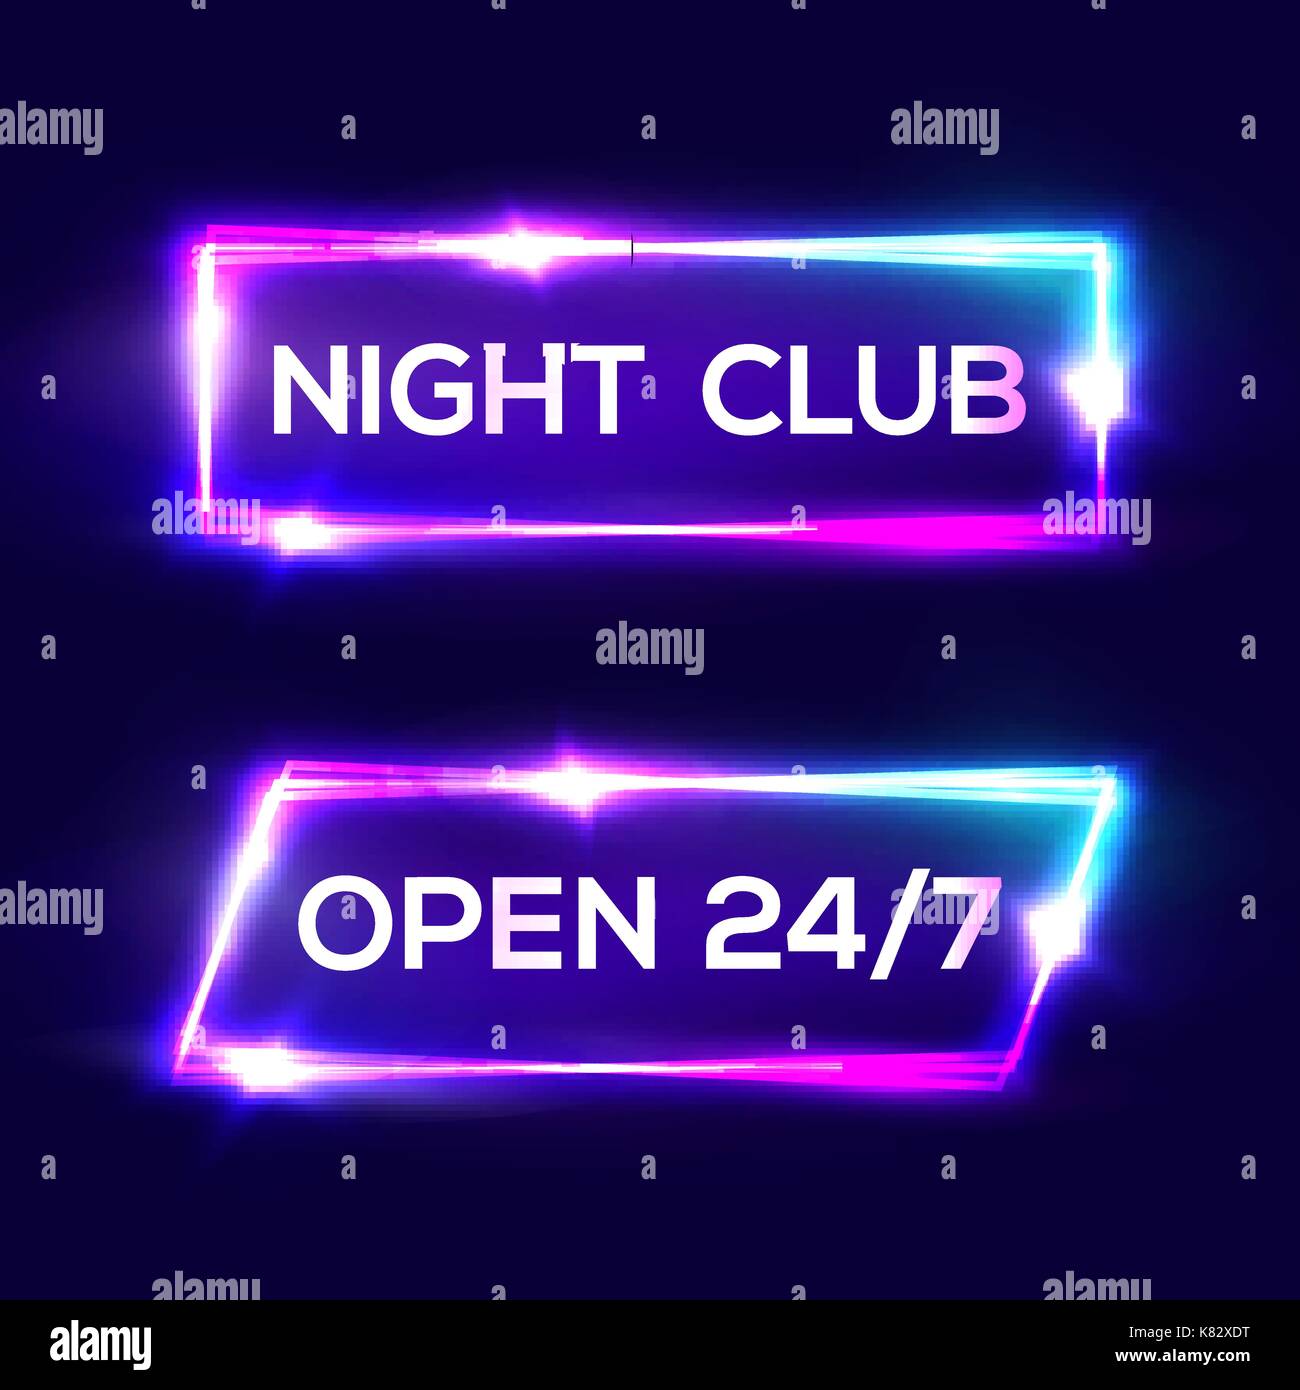 Open 24 7 Hours. Night Club Neon Sign. 3d Retro Light Bar Glowing Set With Neon Effect. Techno Frames On Dark Blue Backdrop. Electric Street Banners Design. Colorful Vector Illustration in 80s Style. Stock Vector